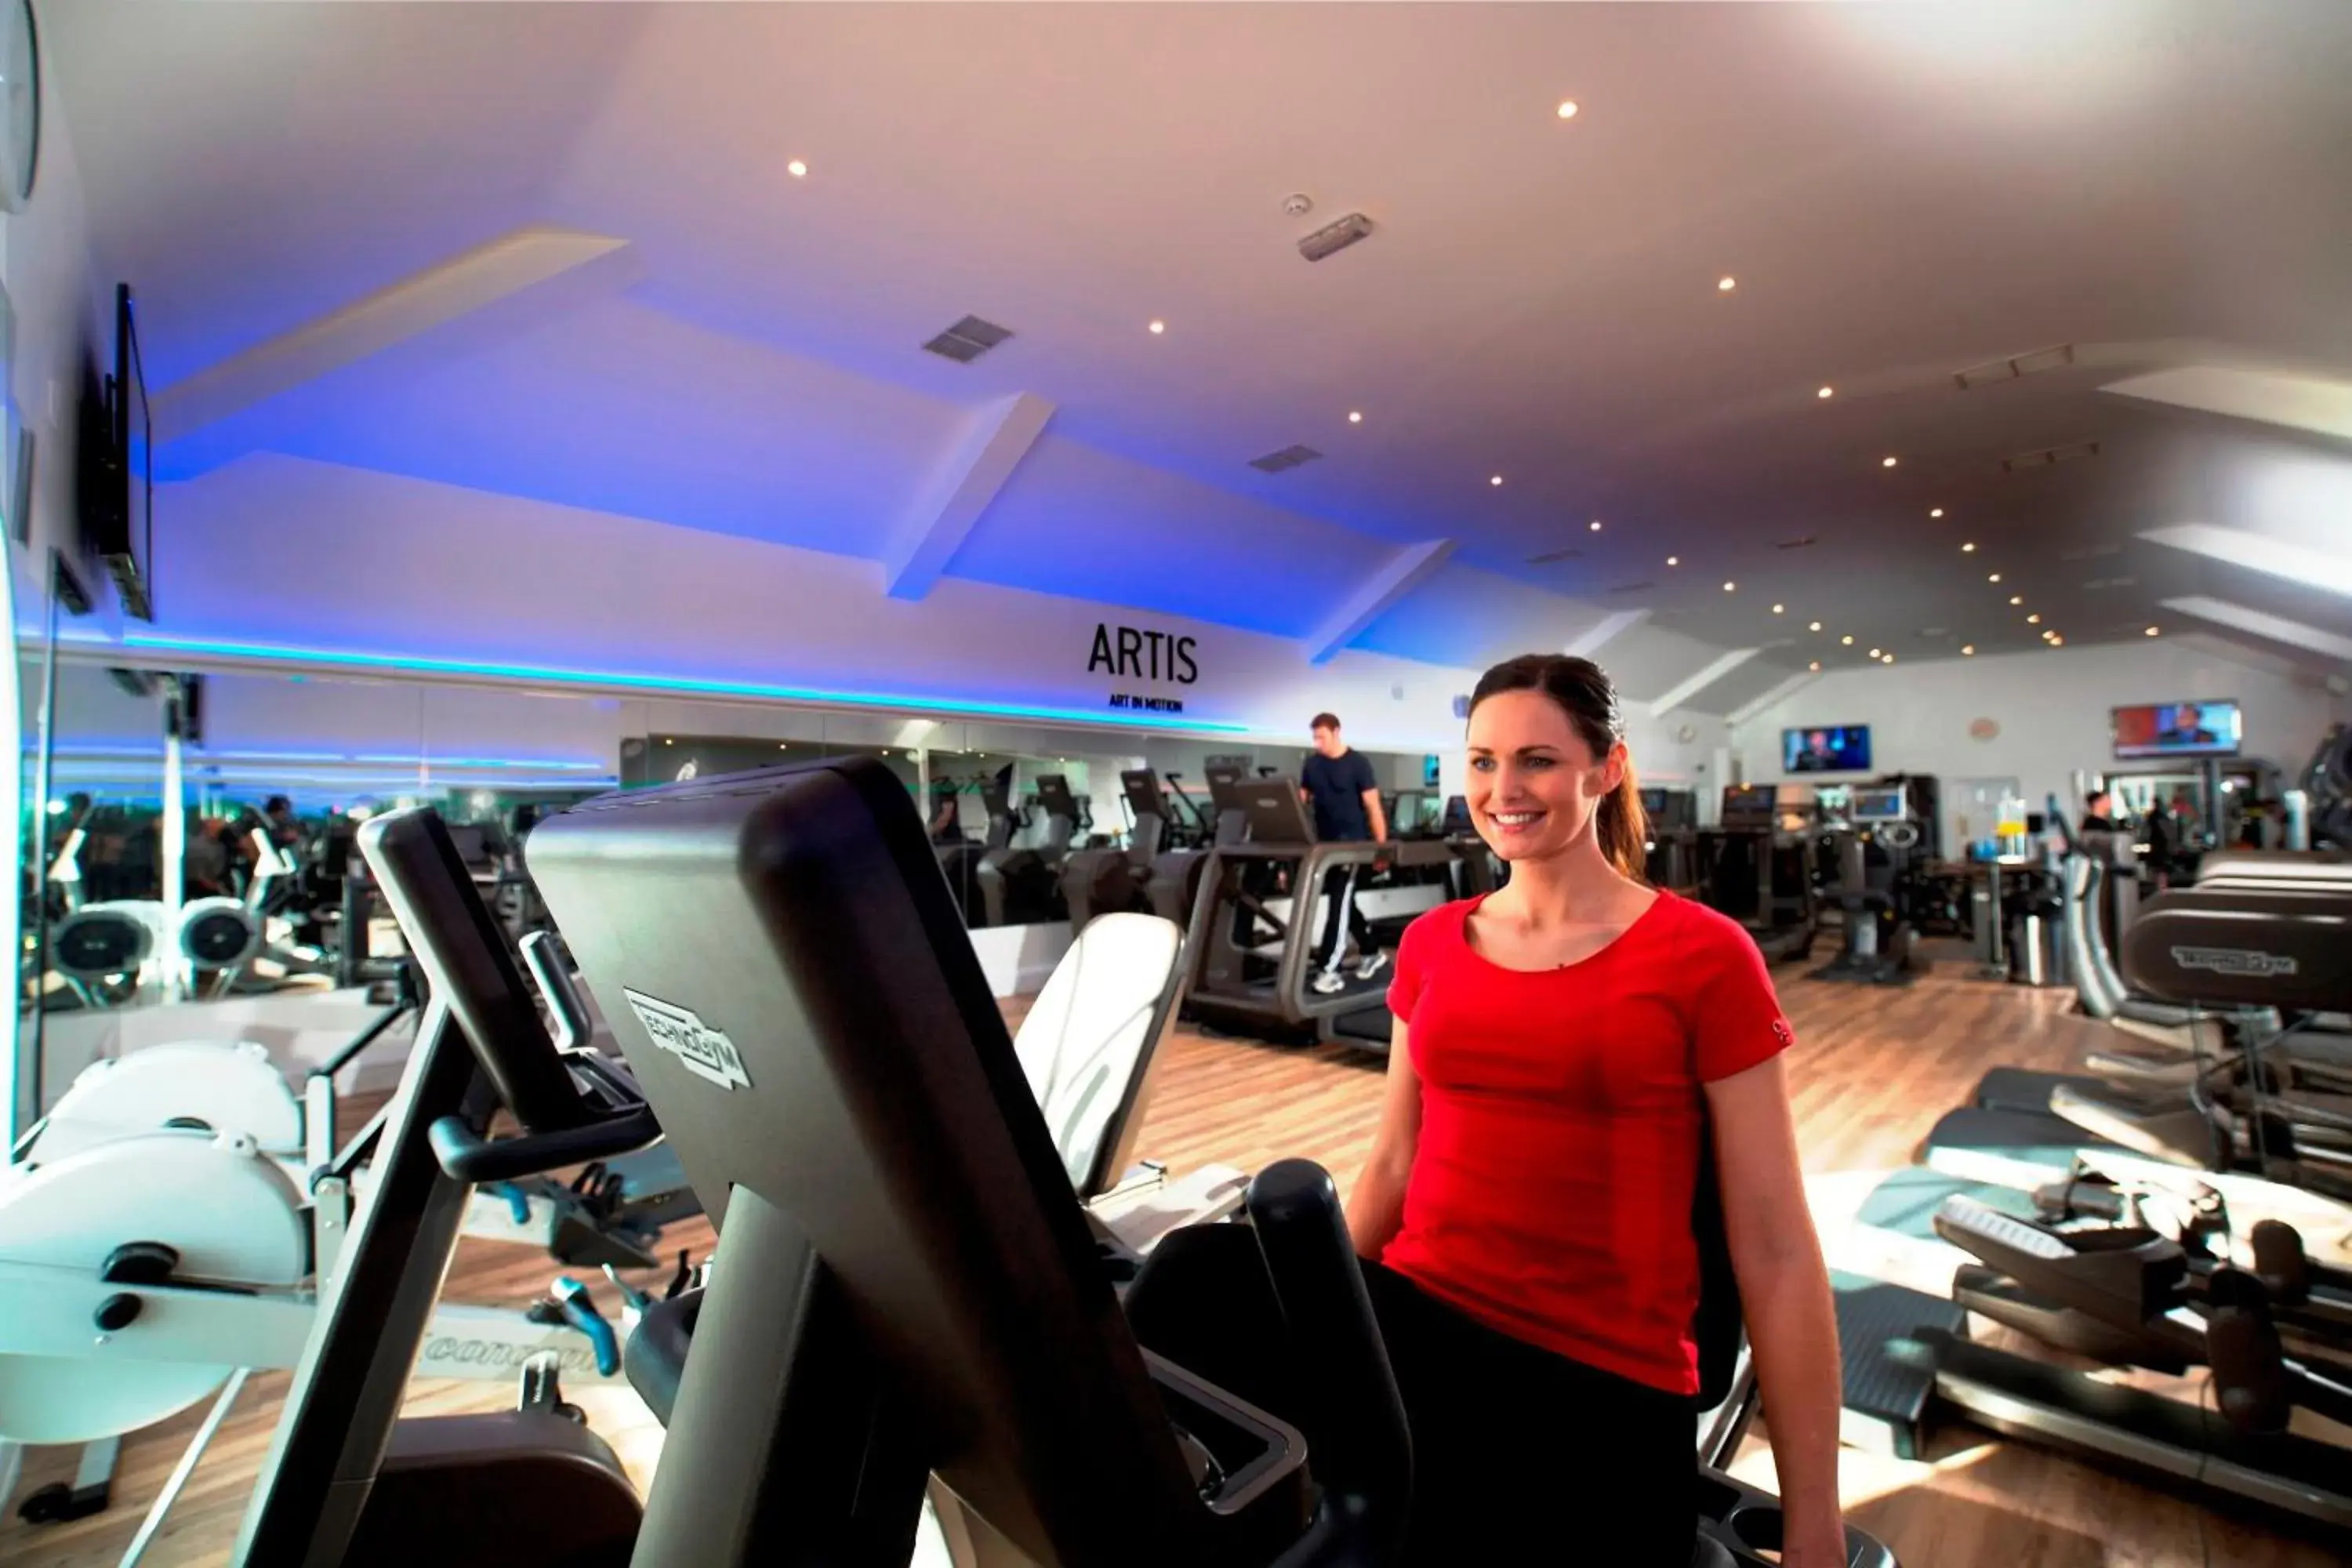 Fitness centre/facilities, Fitness Center/Facilities in Whittlebury Hall and Spa